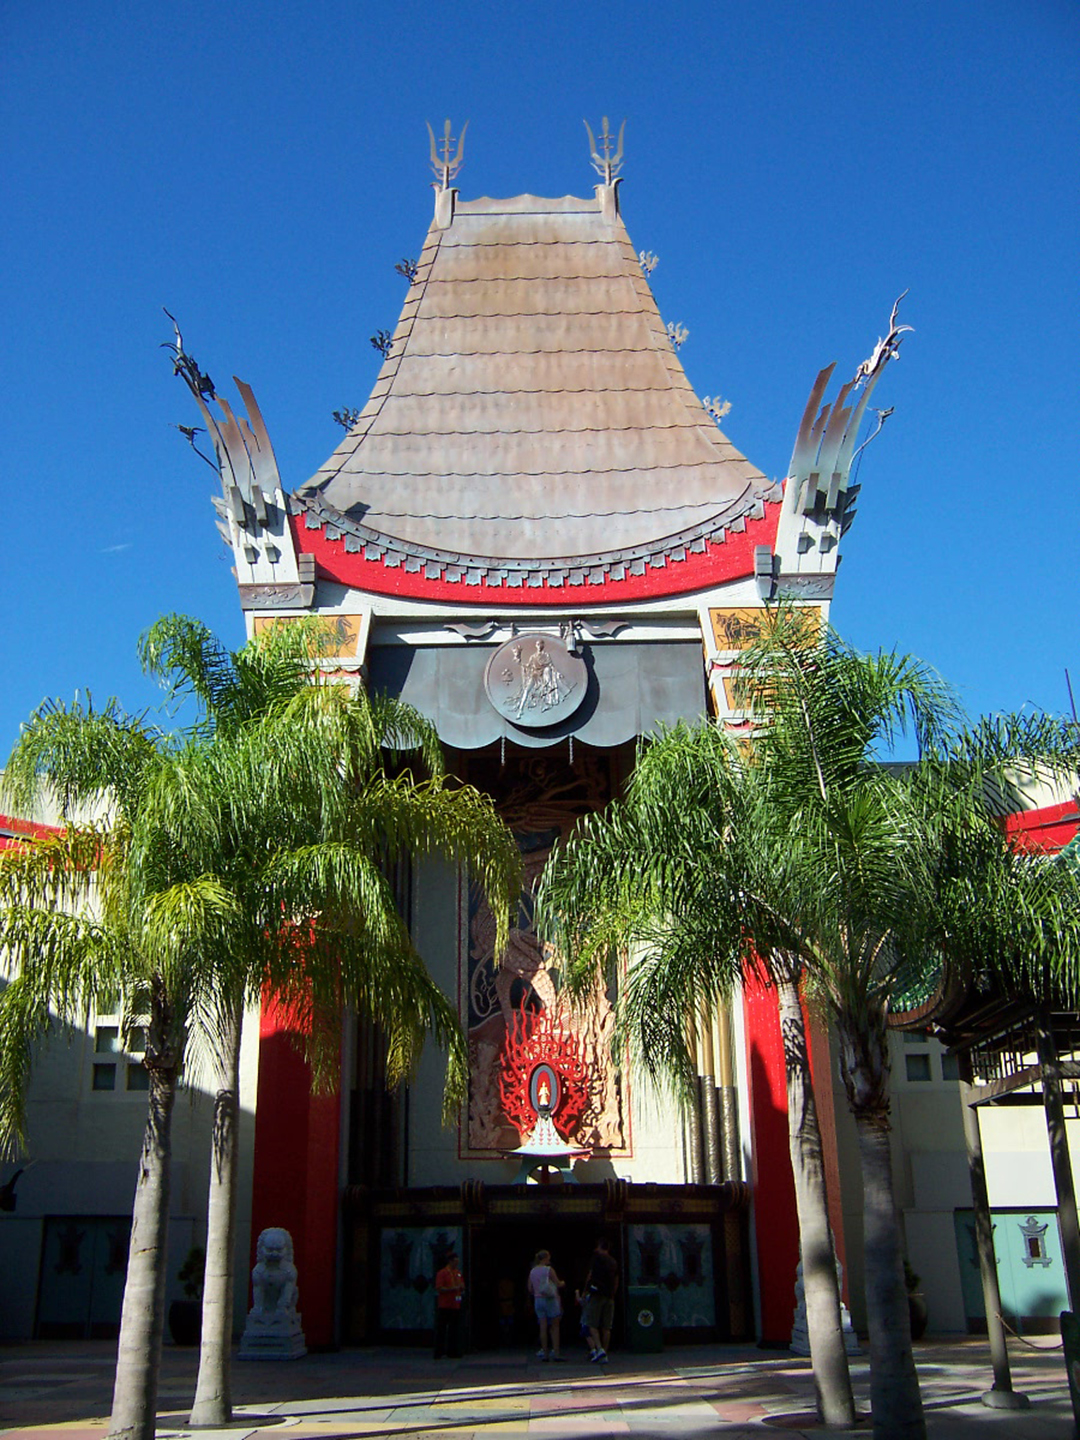 The view we SHOULD see when we enter Disney Hollywood Studios!